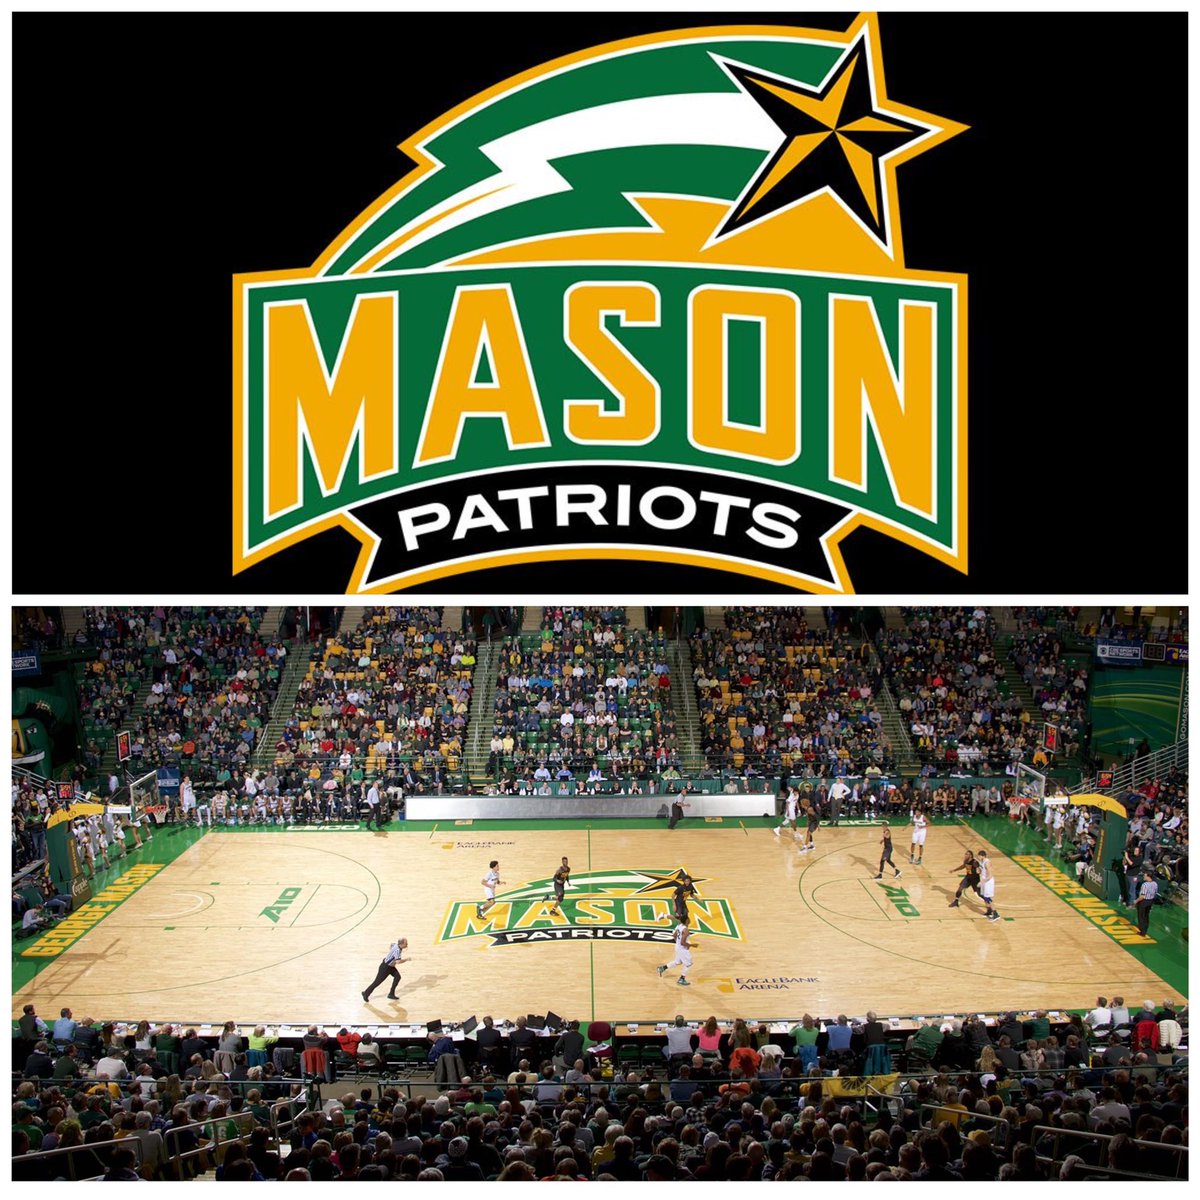 After a great talk with Coach English @Englishscope24, I am blessed to receive an offer from the university of George Mason💚💛.